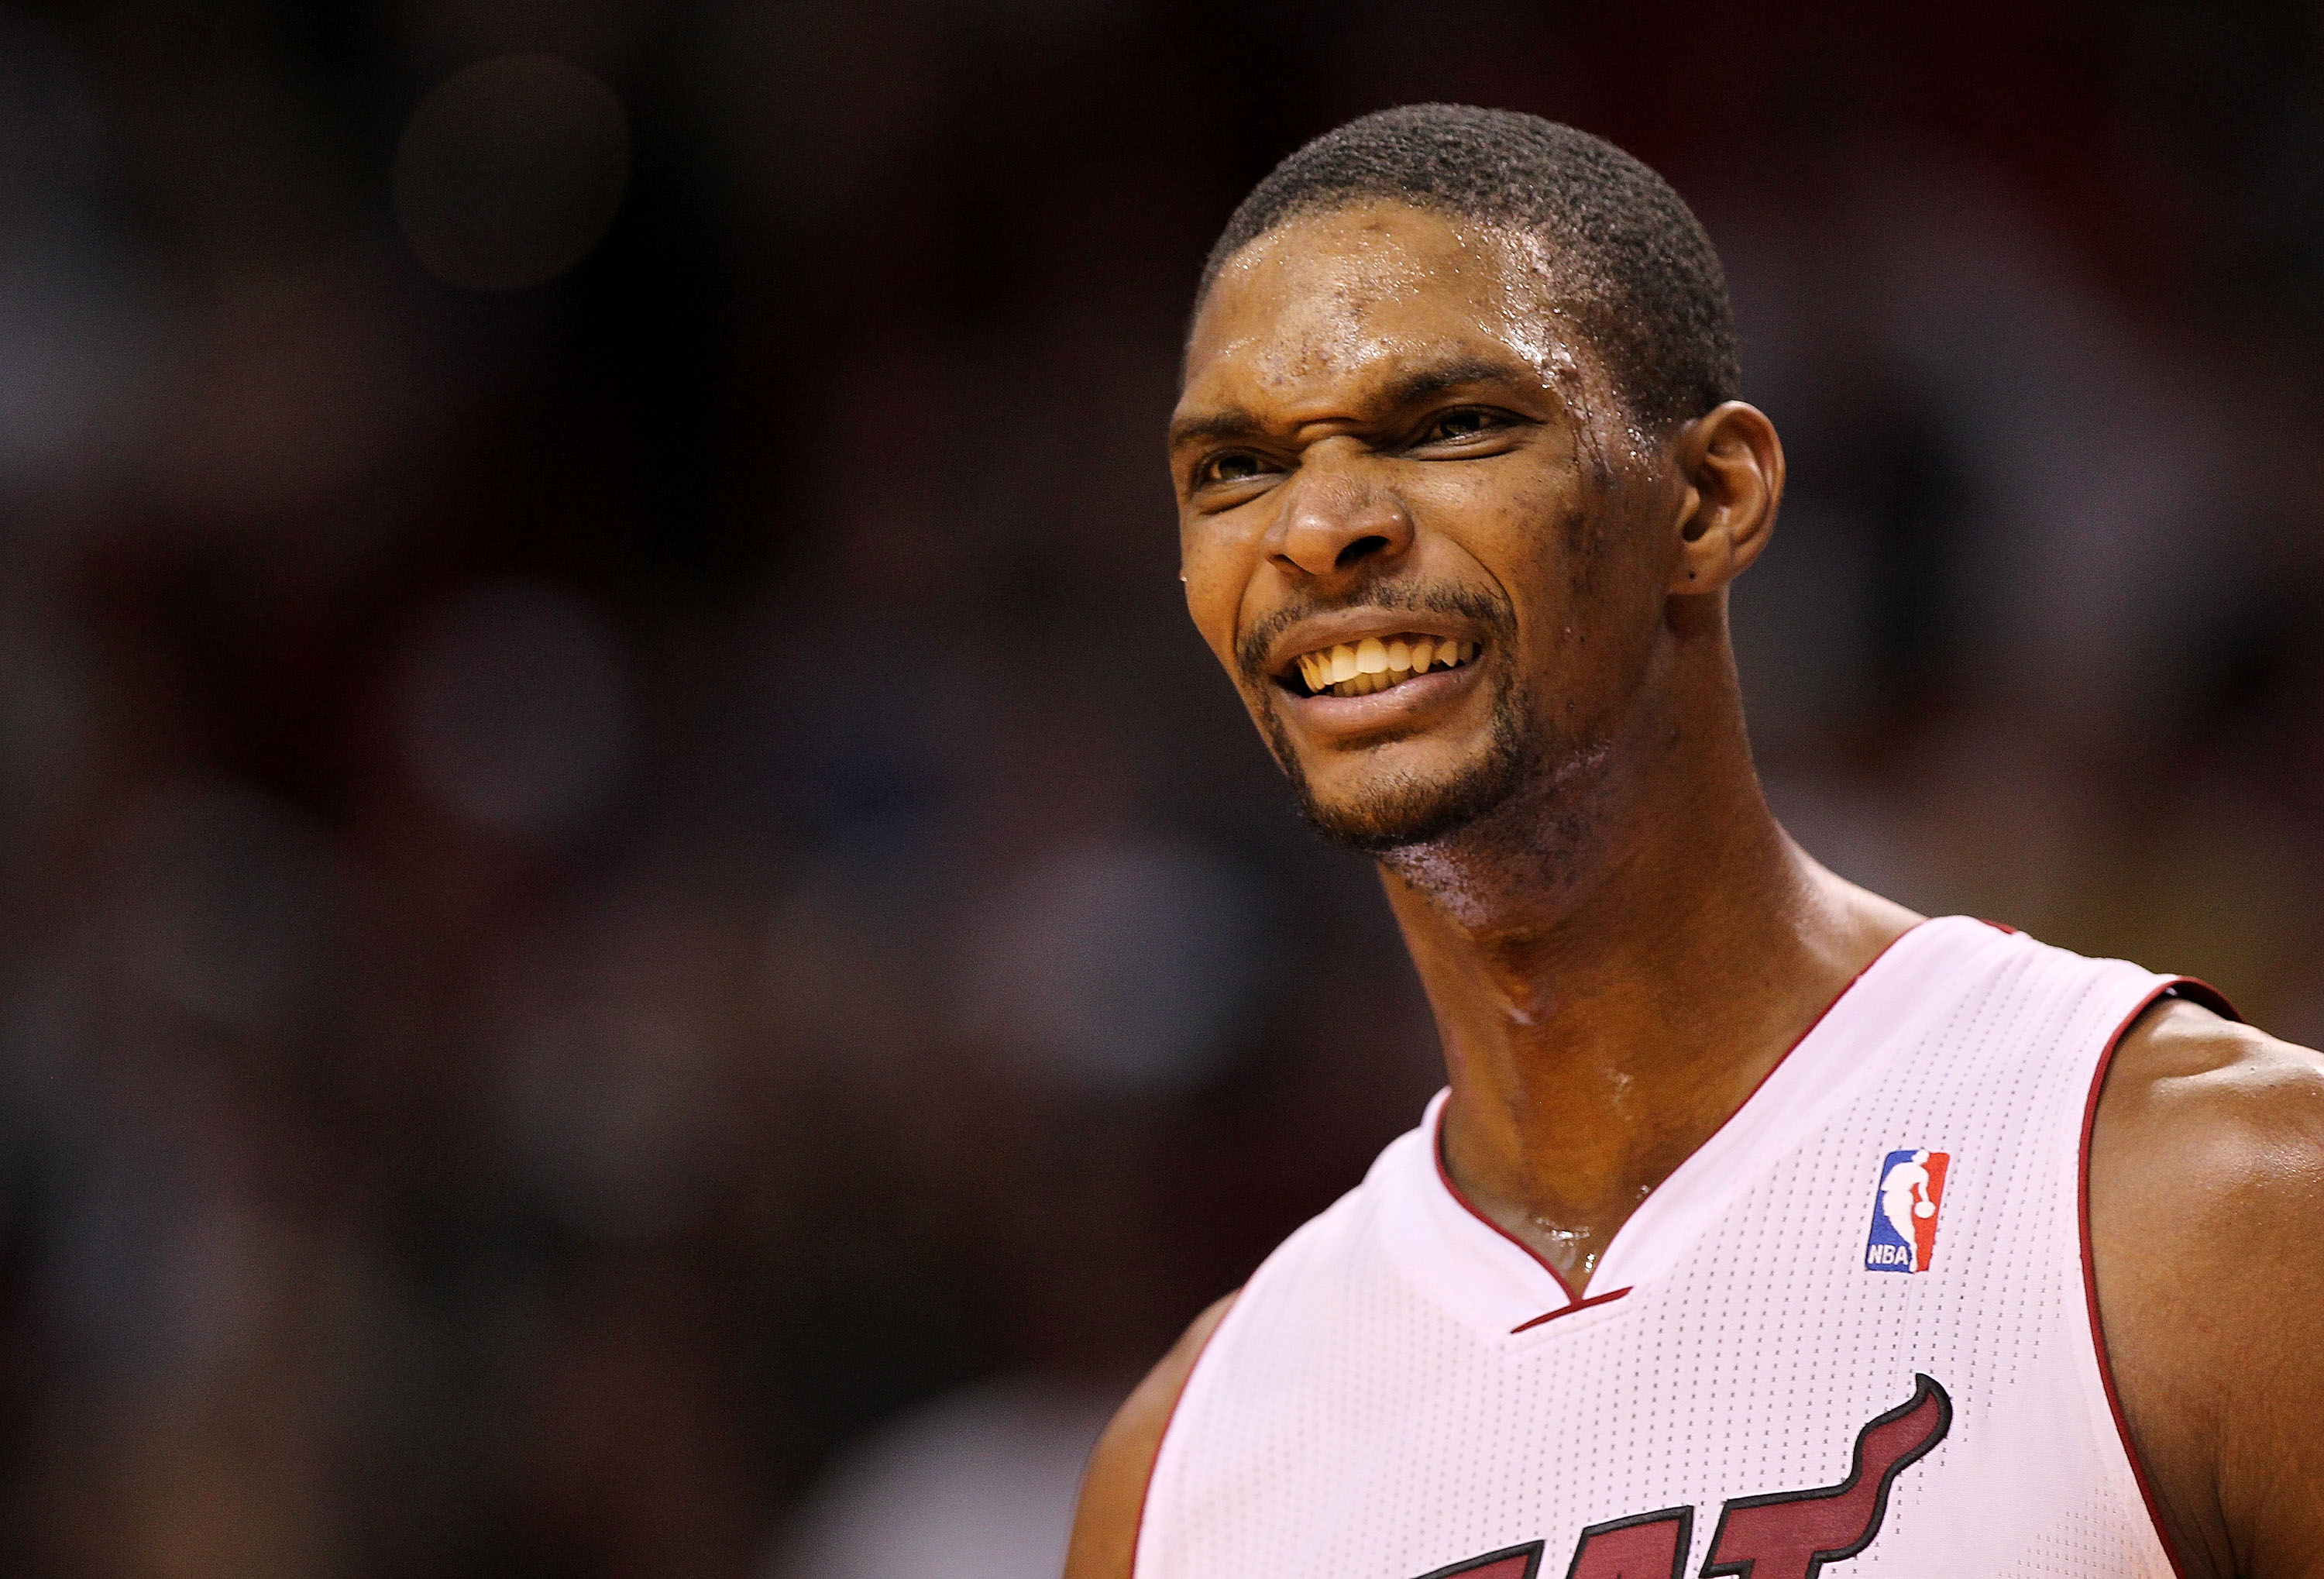 NBA All-Star Game: Did Chris Bosh Deserve to Make the East Roster